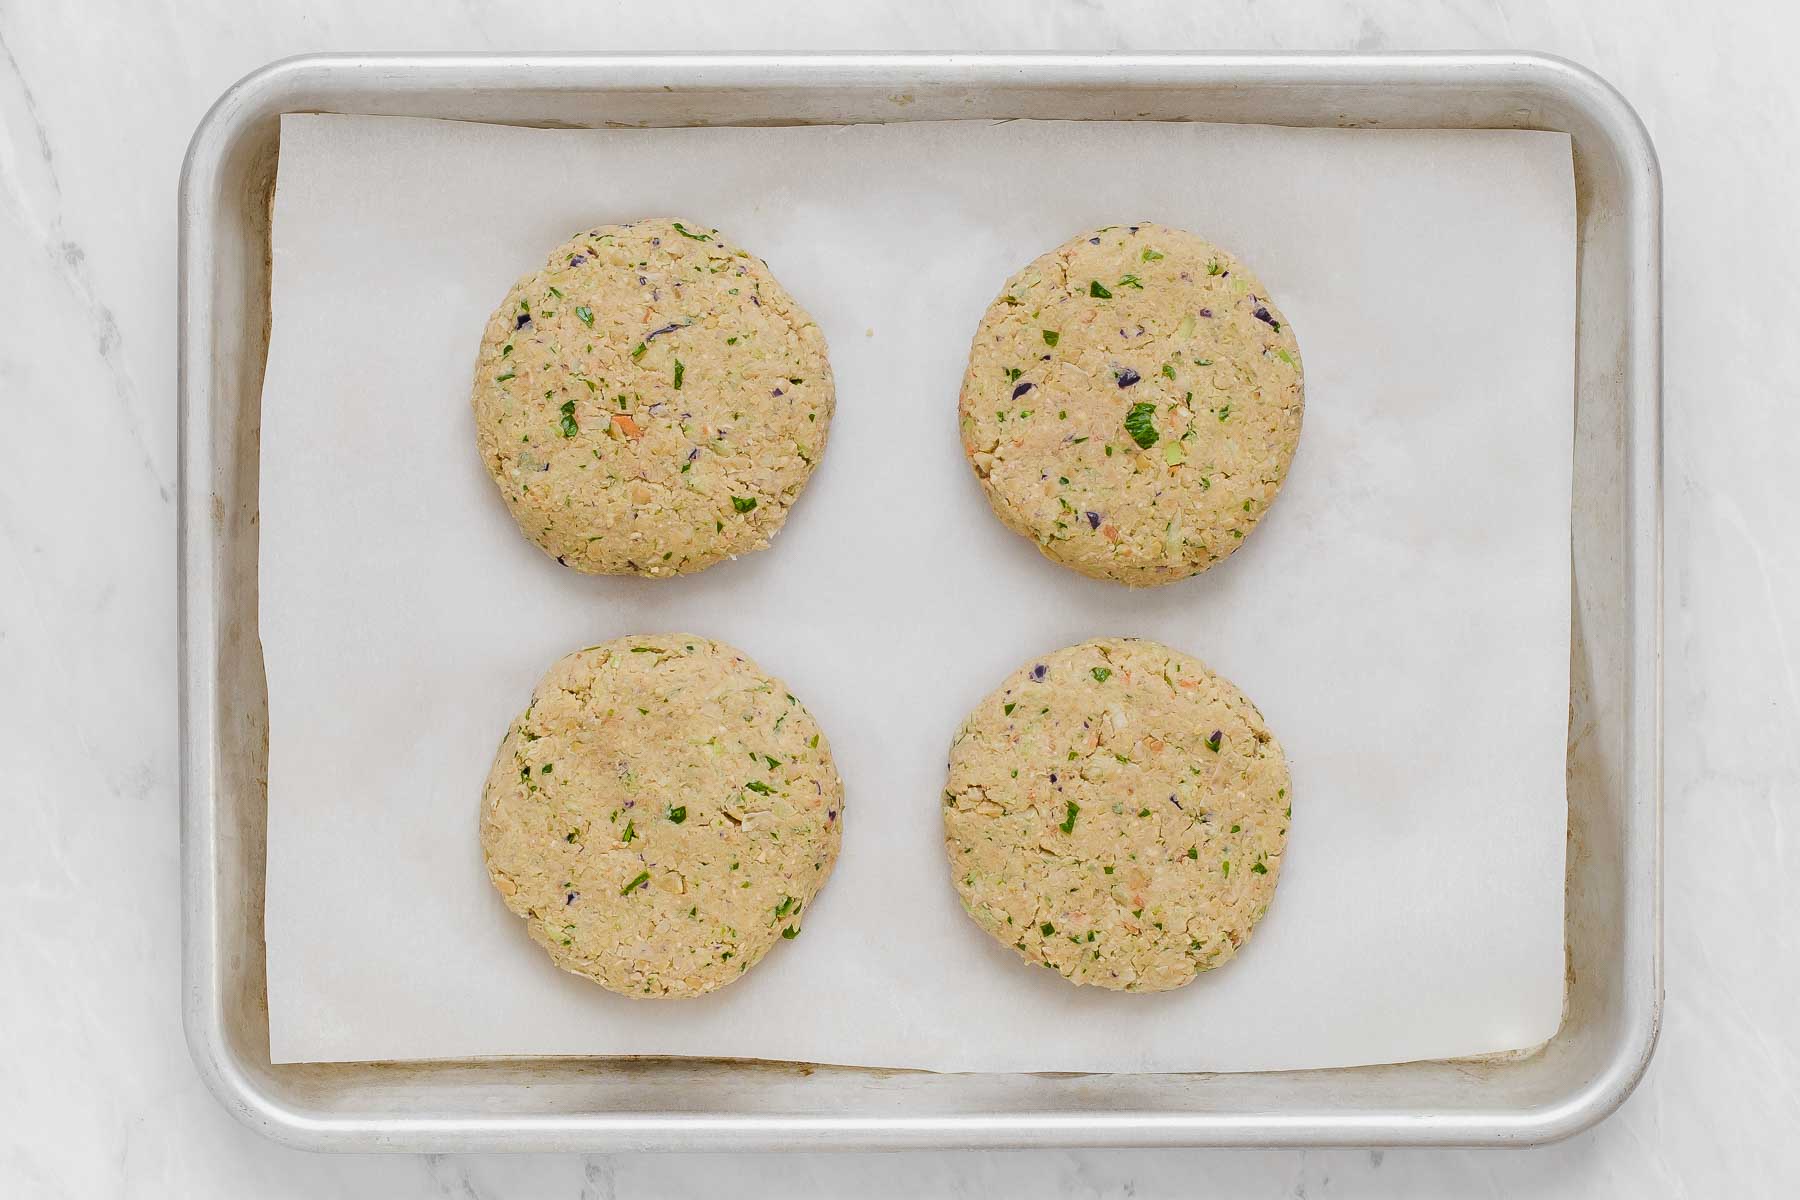 Pureed chickpeas with vegetables shaped into four patties and resting on parchment lined sheet.